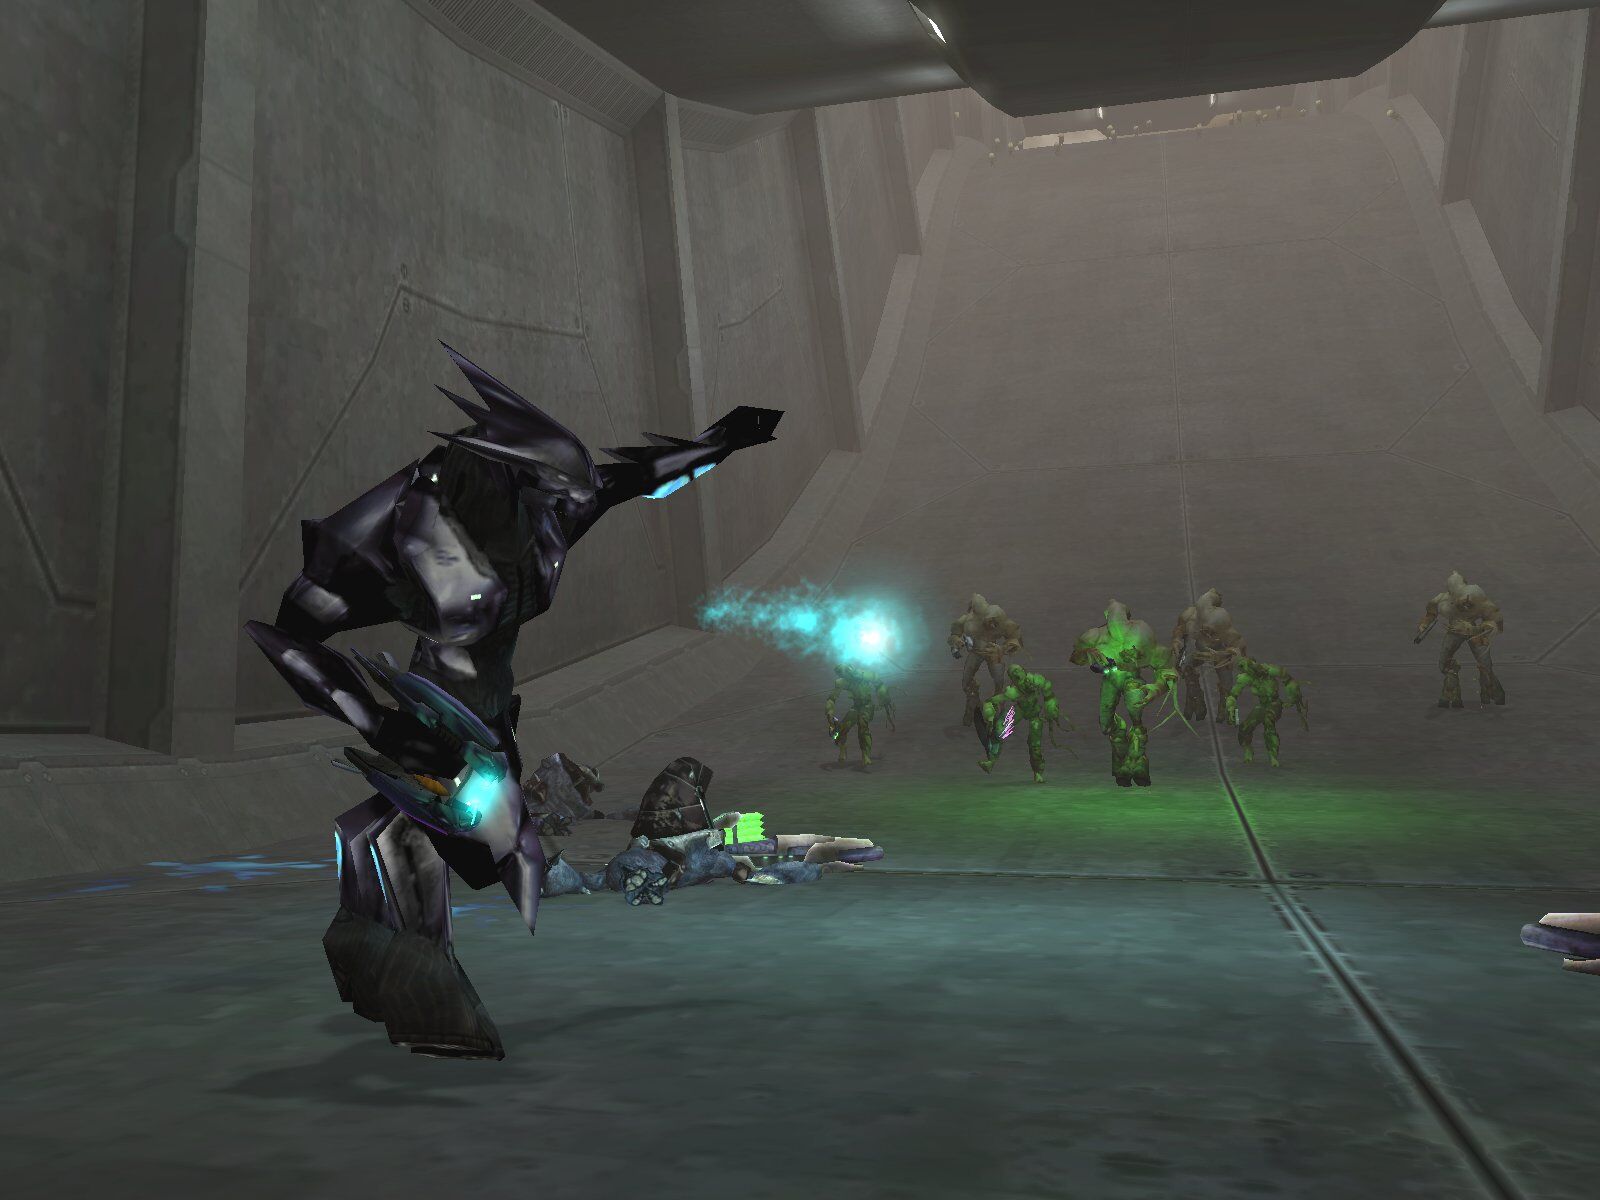 Halo: Combat Evolved on PC sparks fond memories of a simpler time